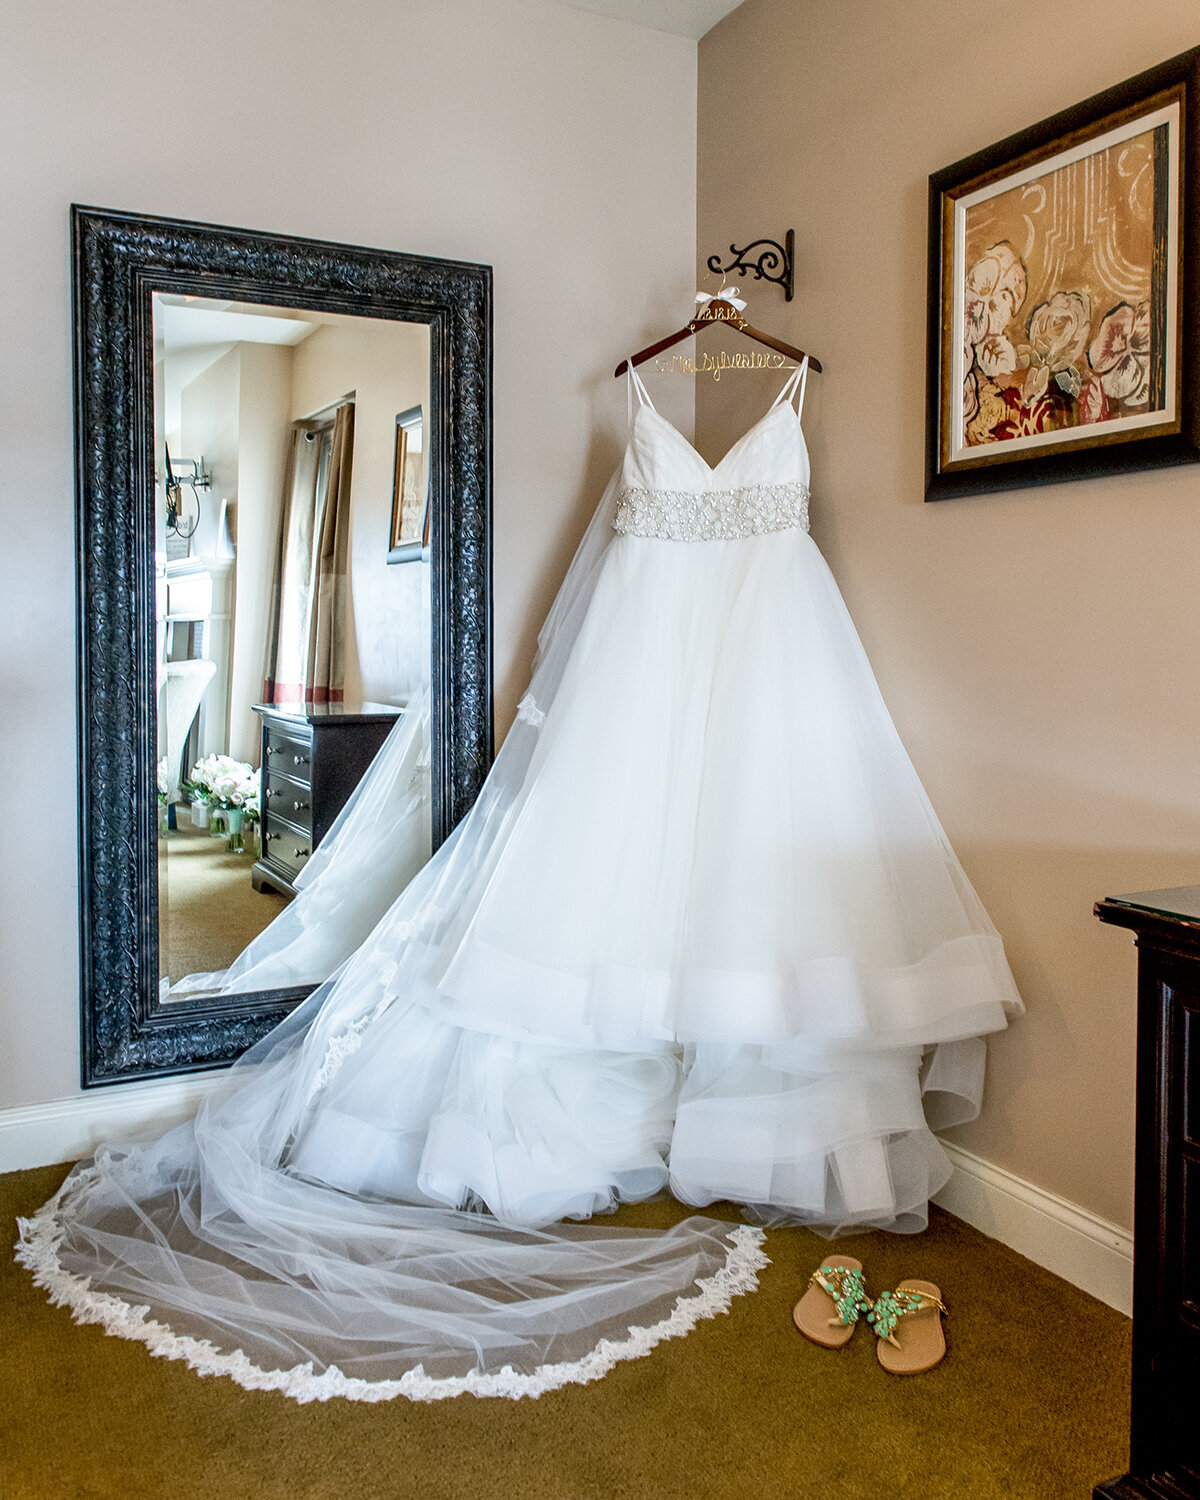 Unon Bluff Meeting House Bridal Suite Dress hanging with veil York Beach Maine